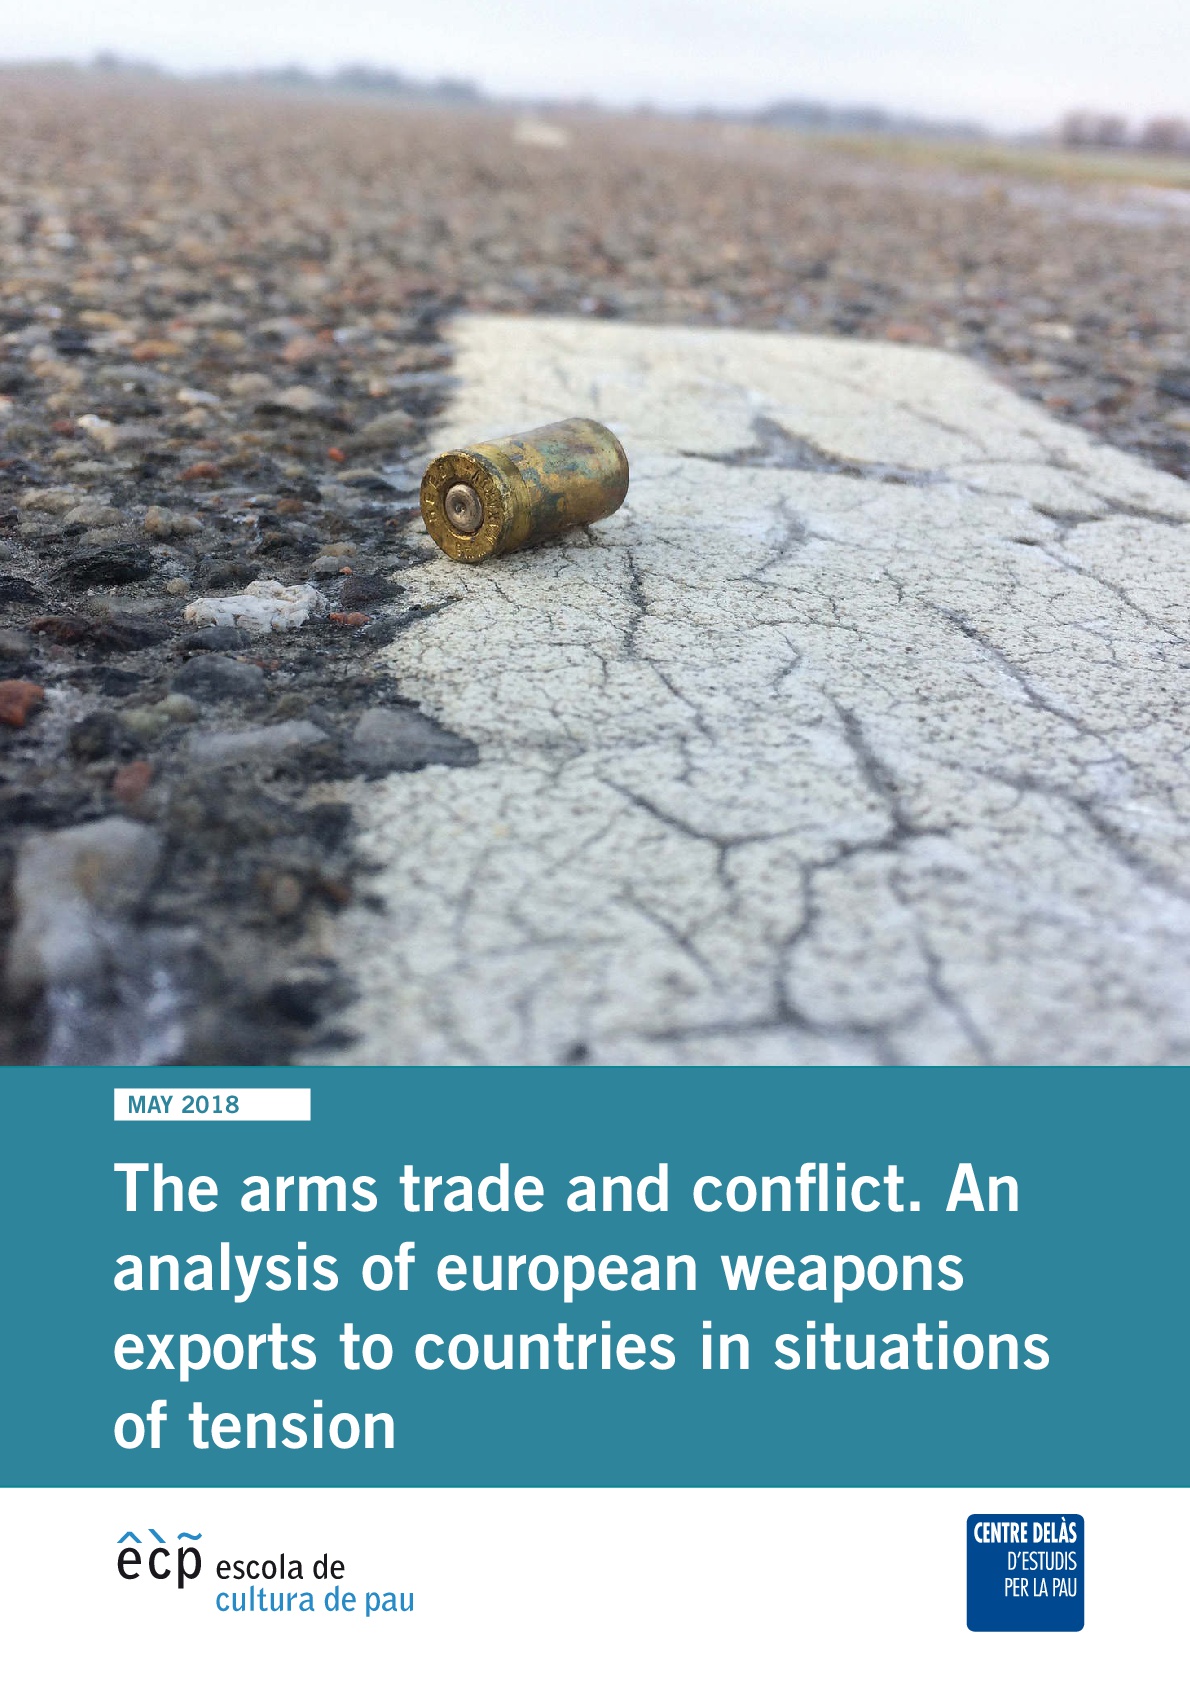 Report of Delàs Center and ECP: Arms trade and conflicts. Analysis of European exports to countries in tension